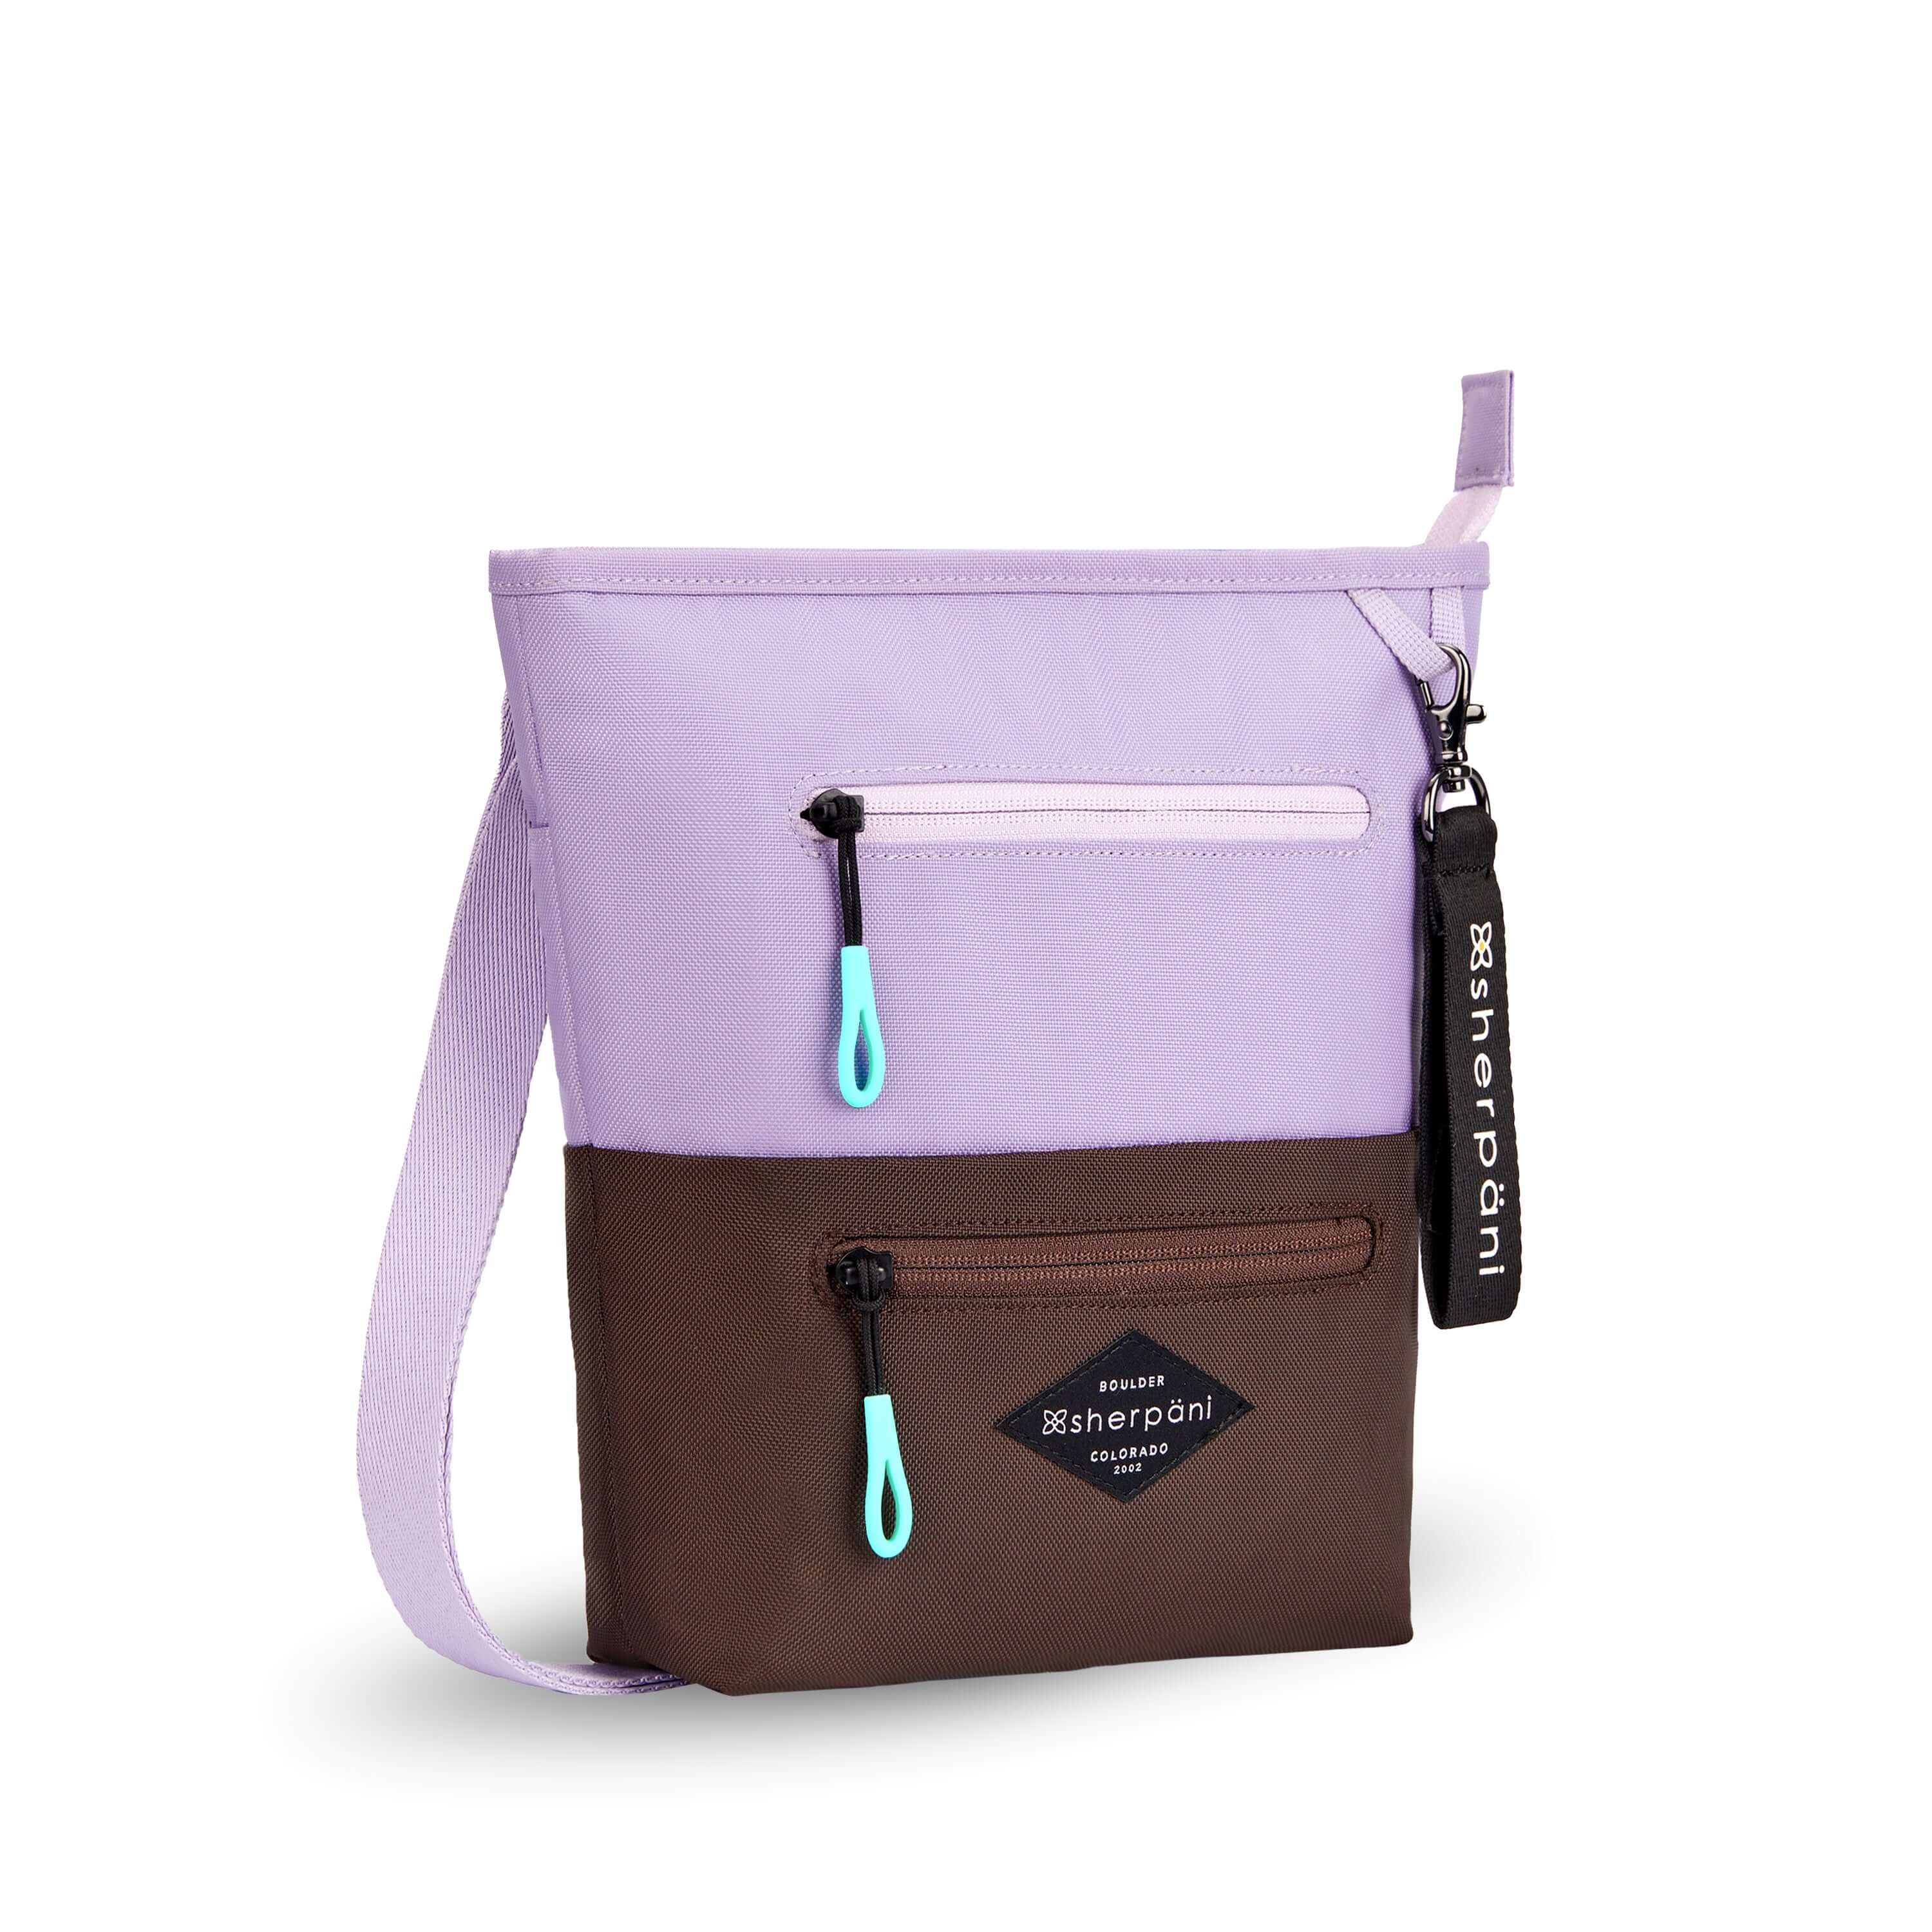 Angled front view of Sherpani’s crossbody, the Sadie, in Lavender. The top half of the bag is lavender and the bottom half of the bag is brown. It features two exterior zipper pockets on the front panel with easy-pull zippers accented in aqua. A Sherpani branded keychain is attached to a fabric loop in the upper right corner. It has an adjustable crossbody strap.